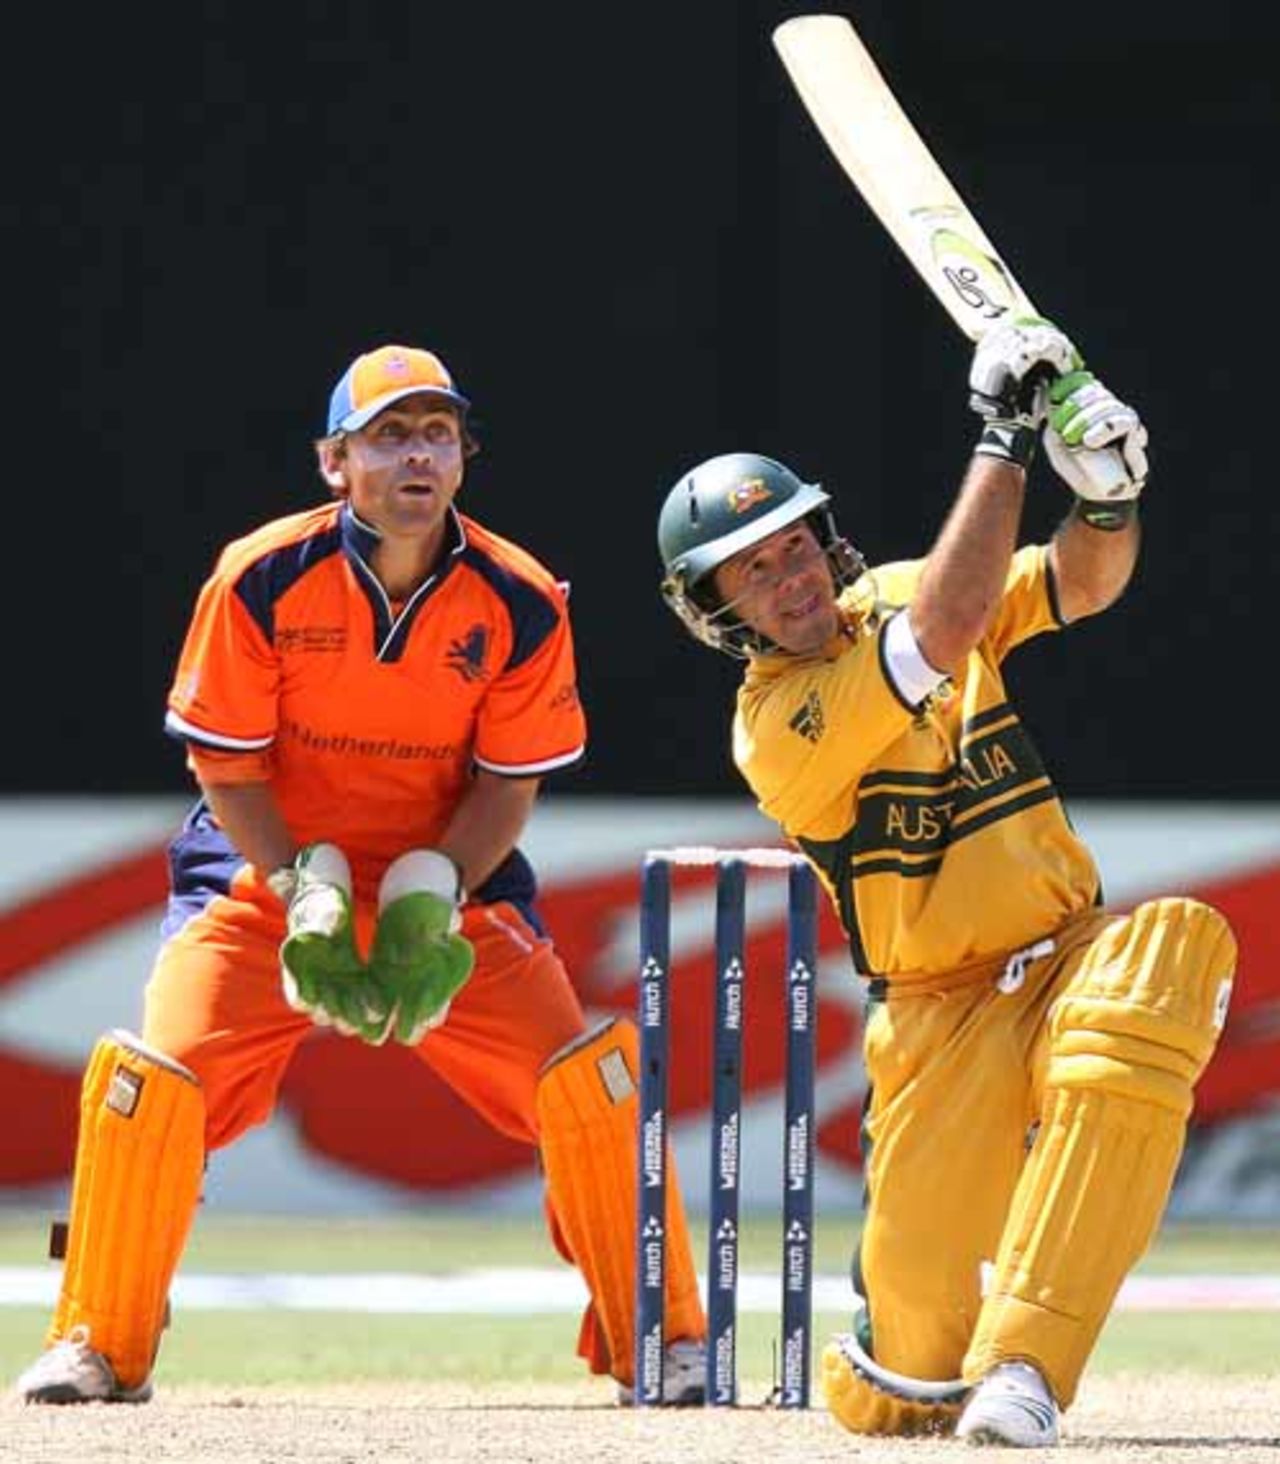 Jeroen Smits watches Ricky Ponting heave one over long on, Australia v Netherlands, Group A, St Kitts, March 18, 2007